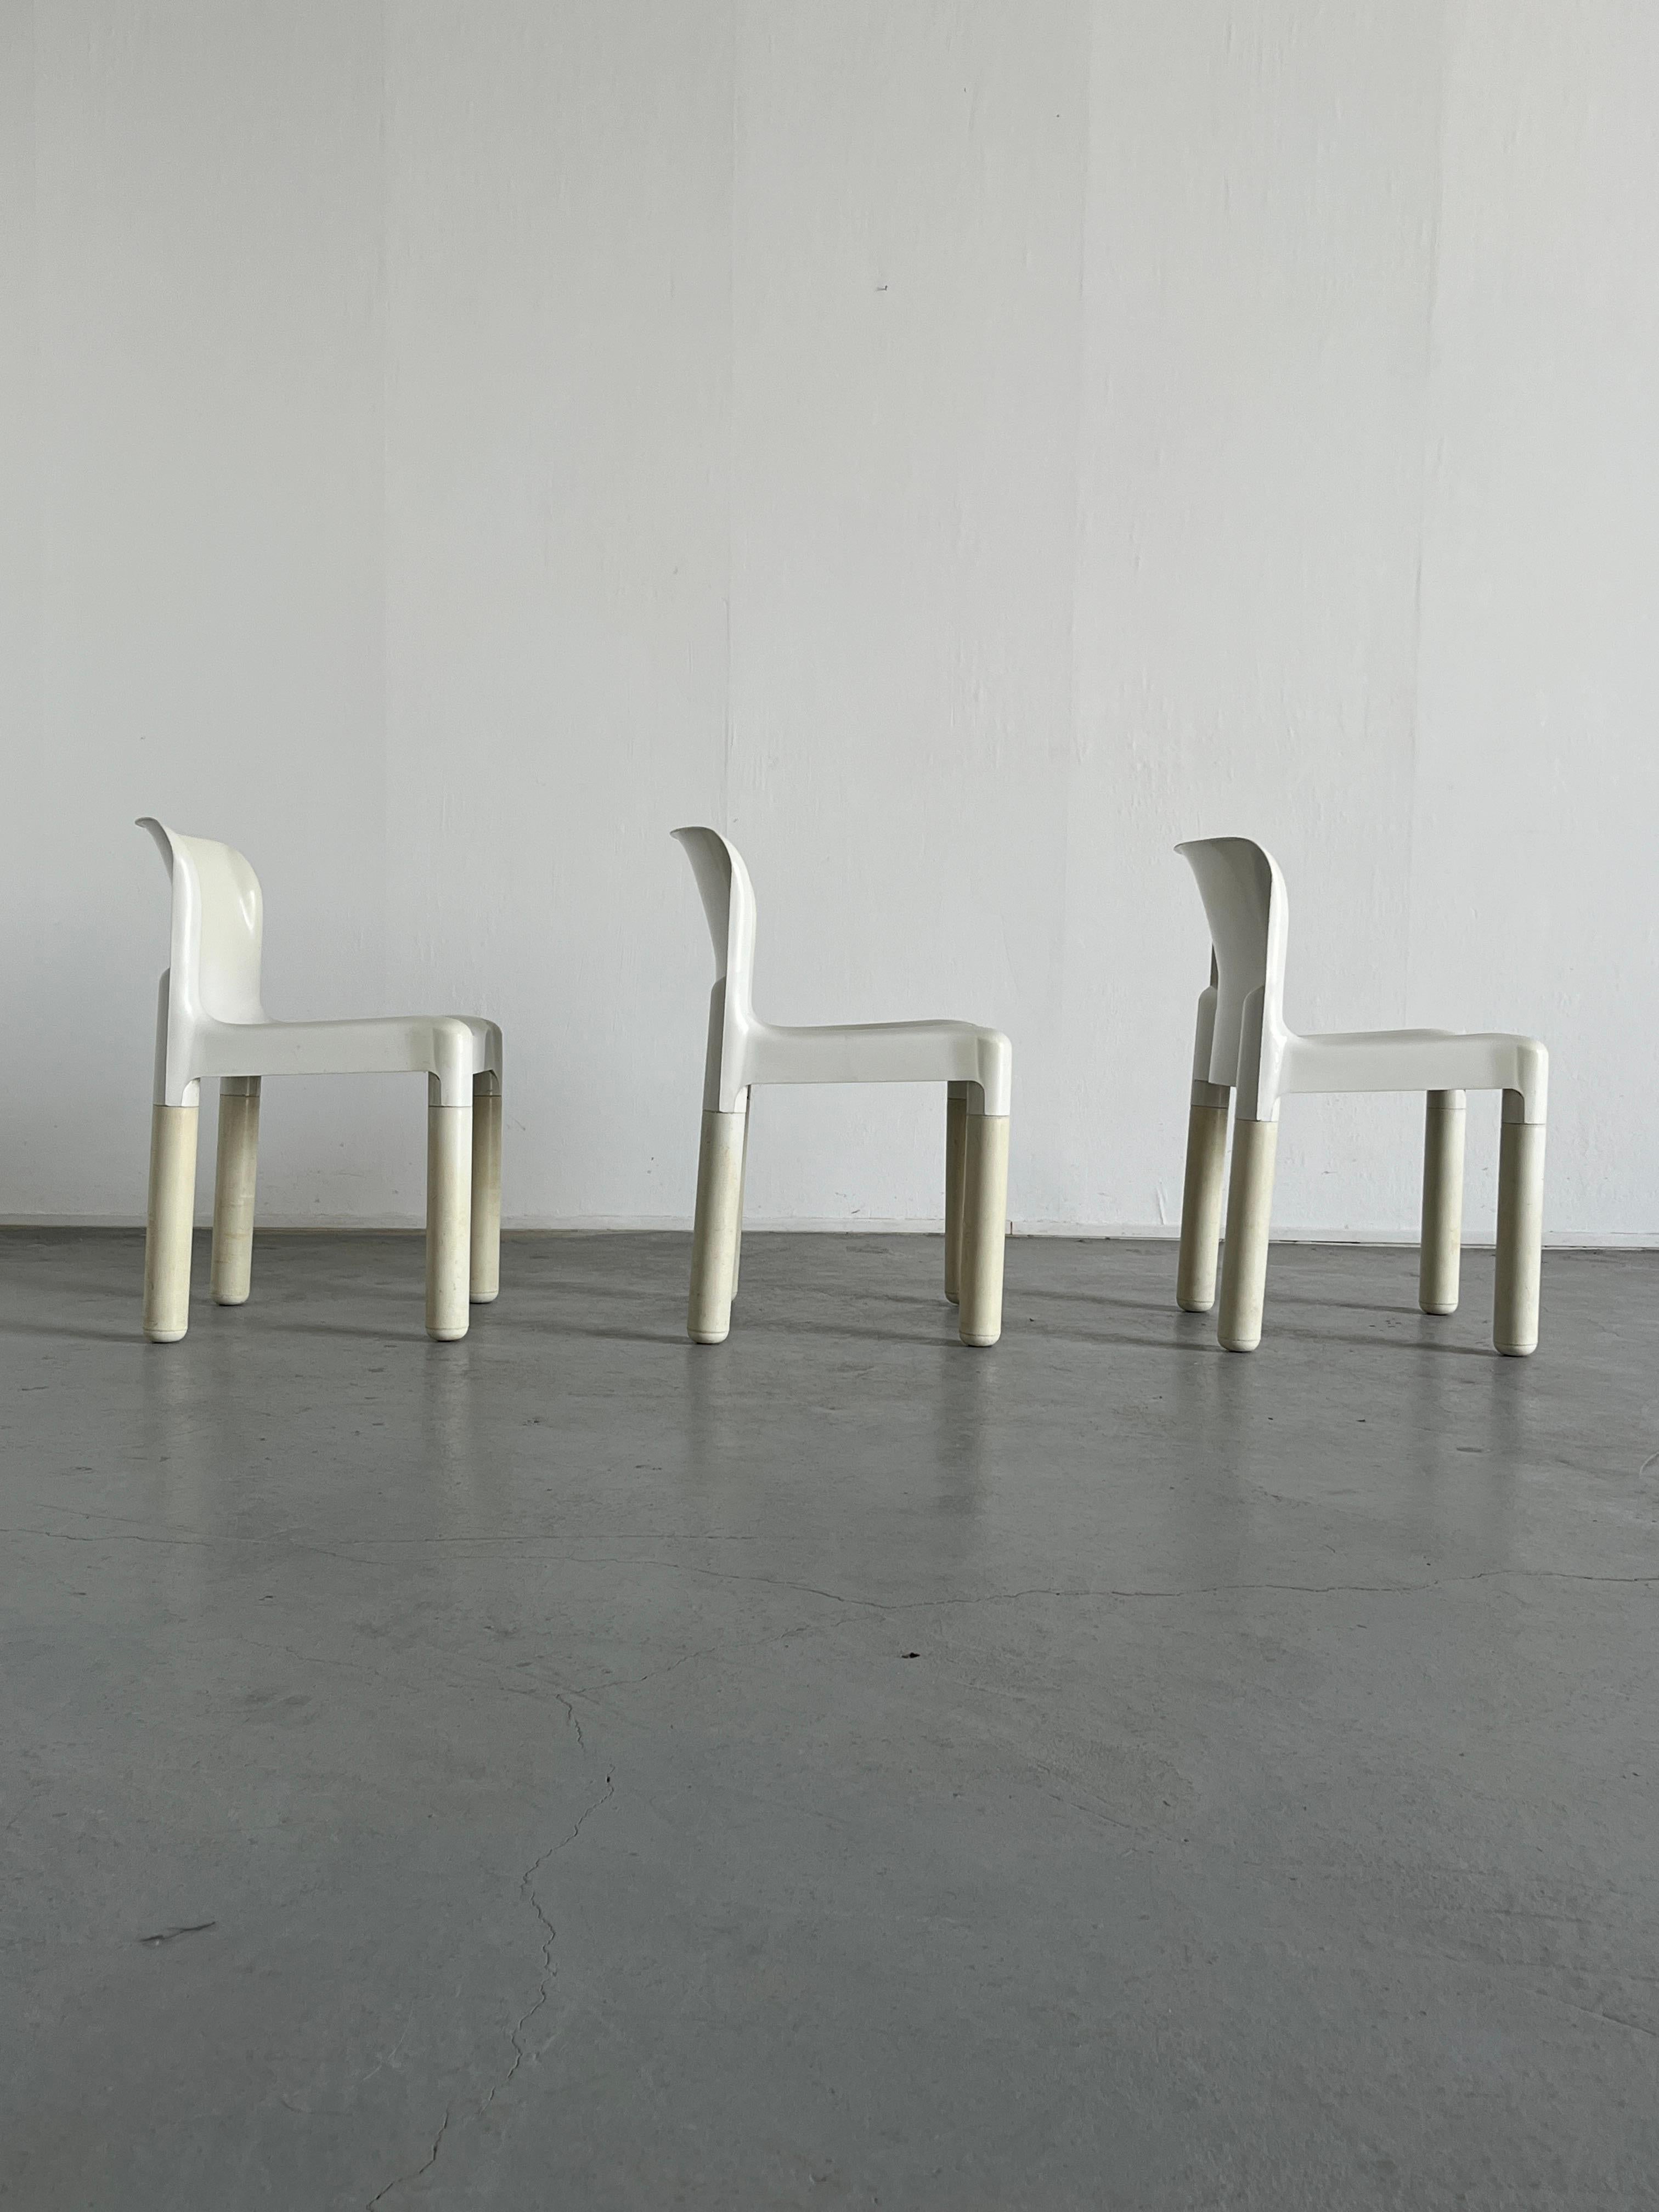 1 of 3 Vintage Carlo Bartoli 4875 Chairs for Kartell, White Edition, 1972 Italy For Sale 2